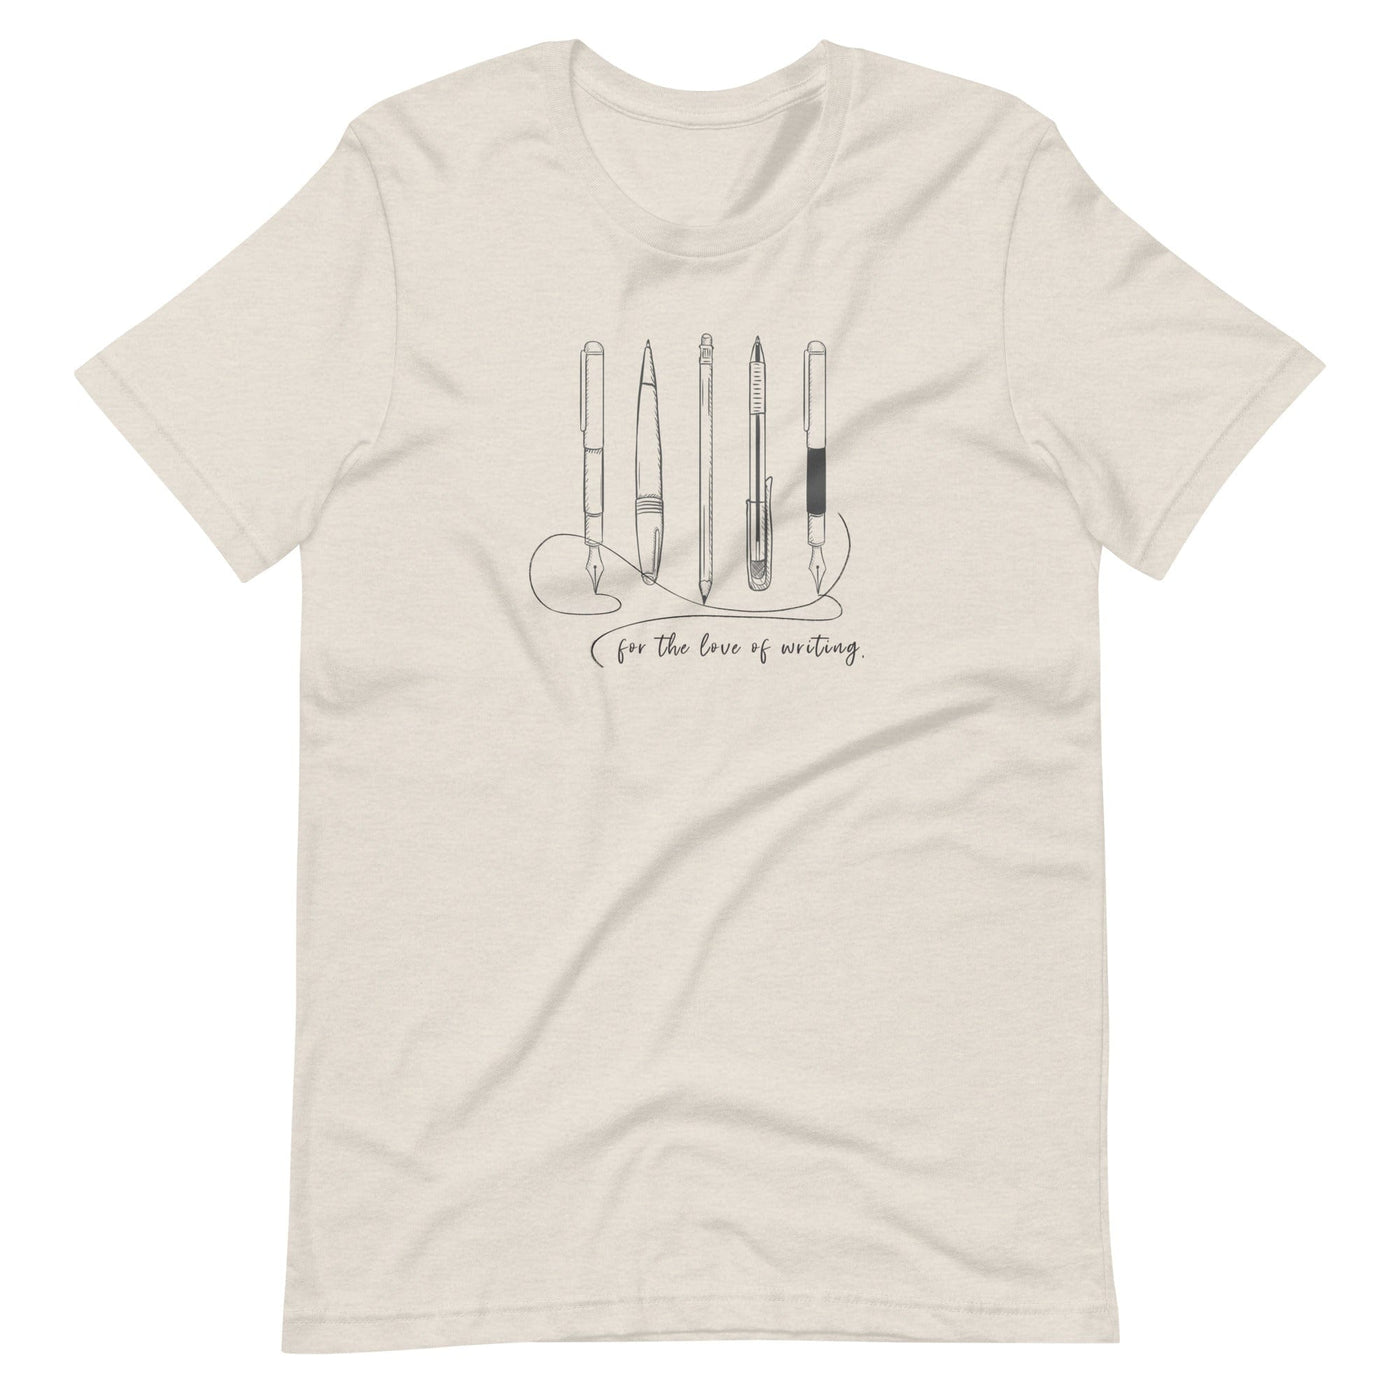 Lit Haven Booktique T-Shirt Heather Dust / S For the Love of Writing tee